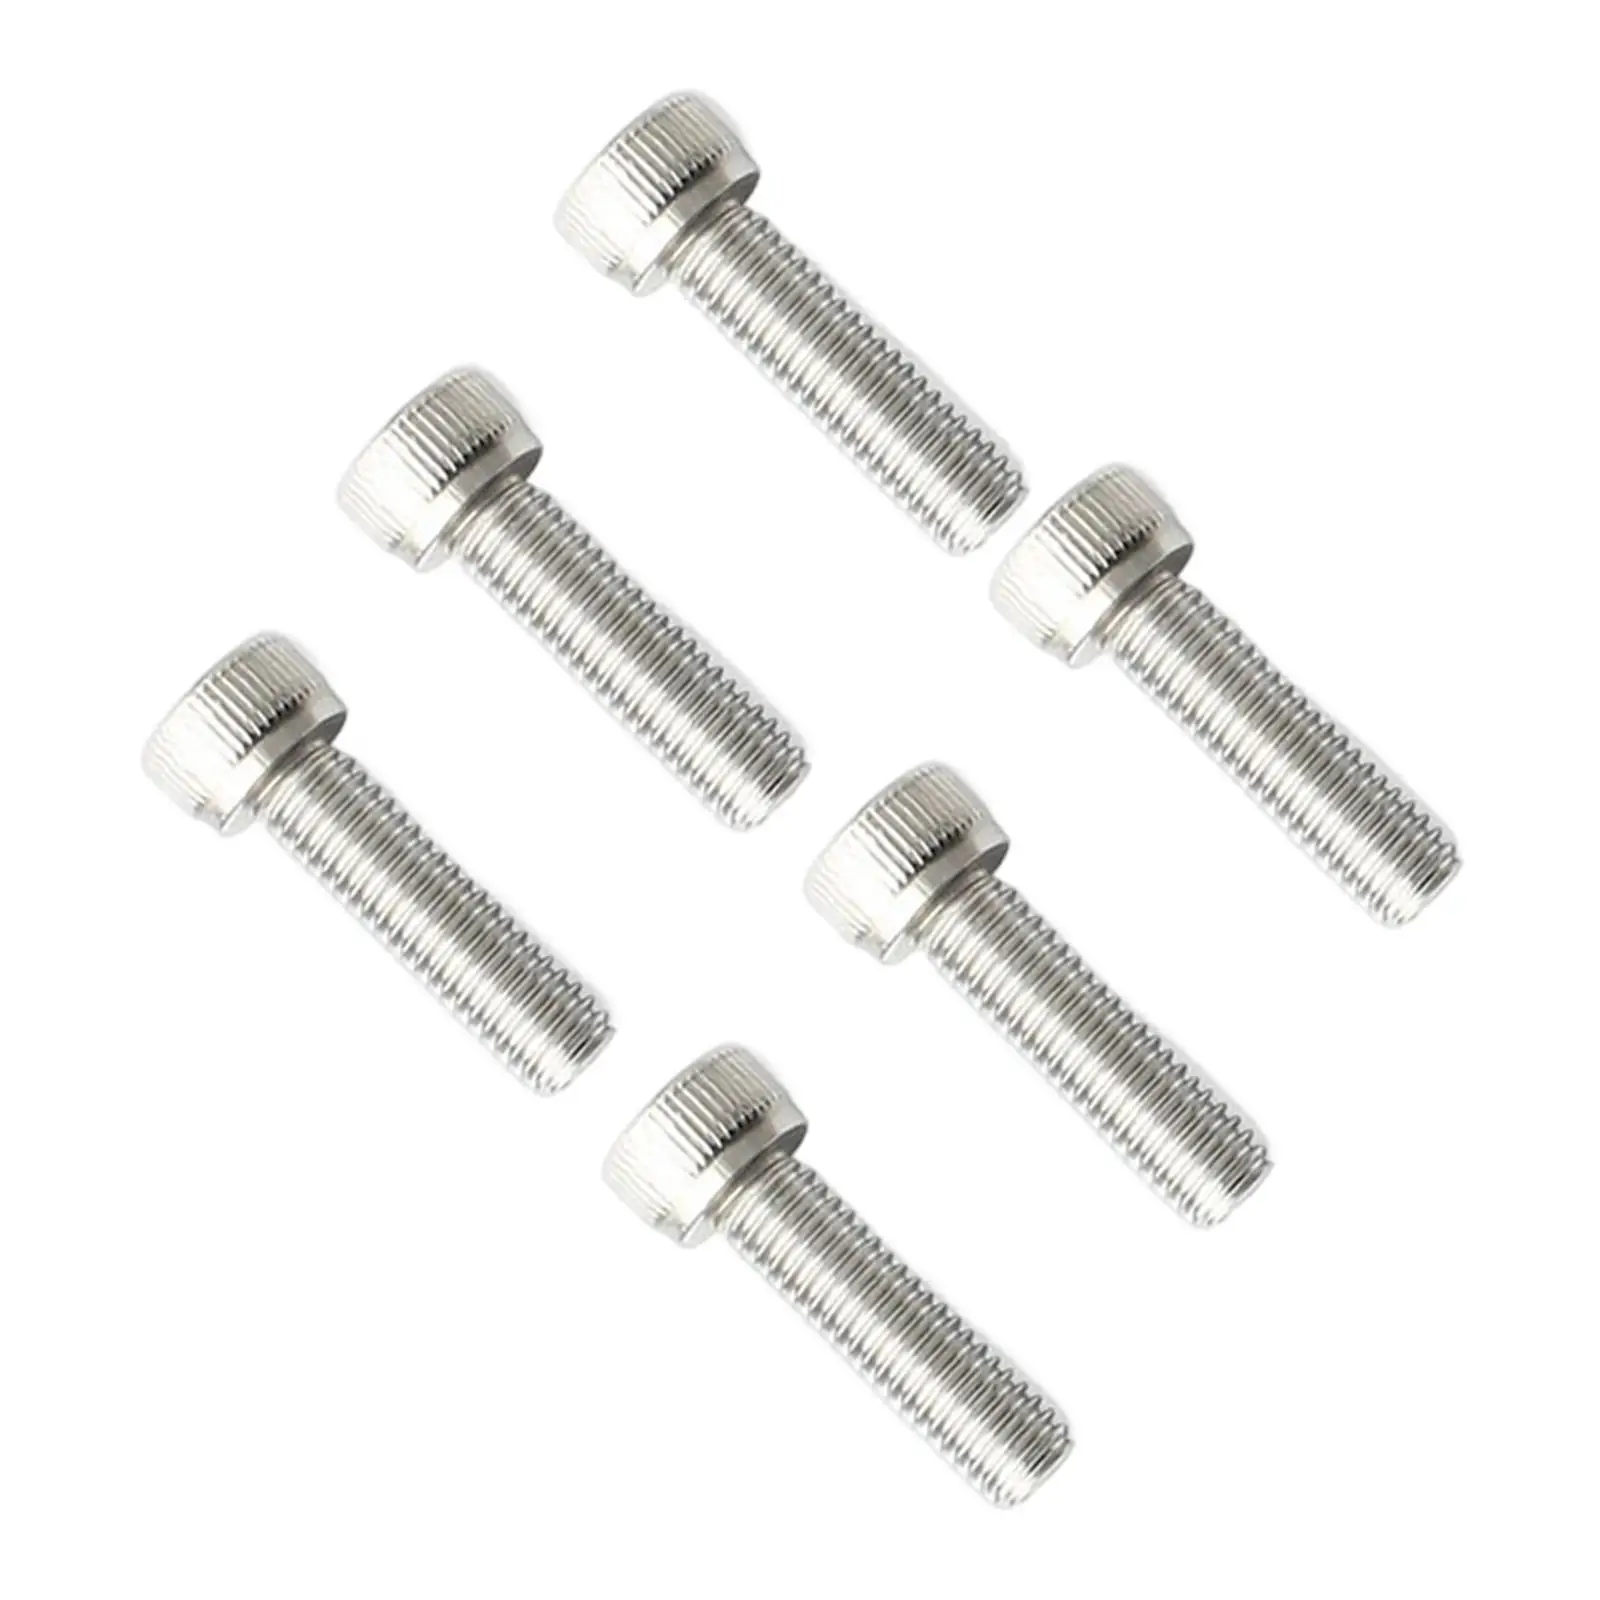 6x High Strength Bicycle Stem Screws M5x18mm Bolts Water Bottle Cage Repairing Hardware